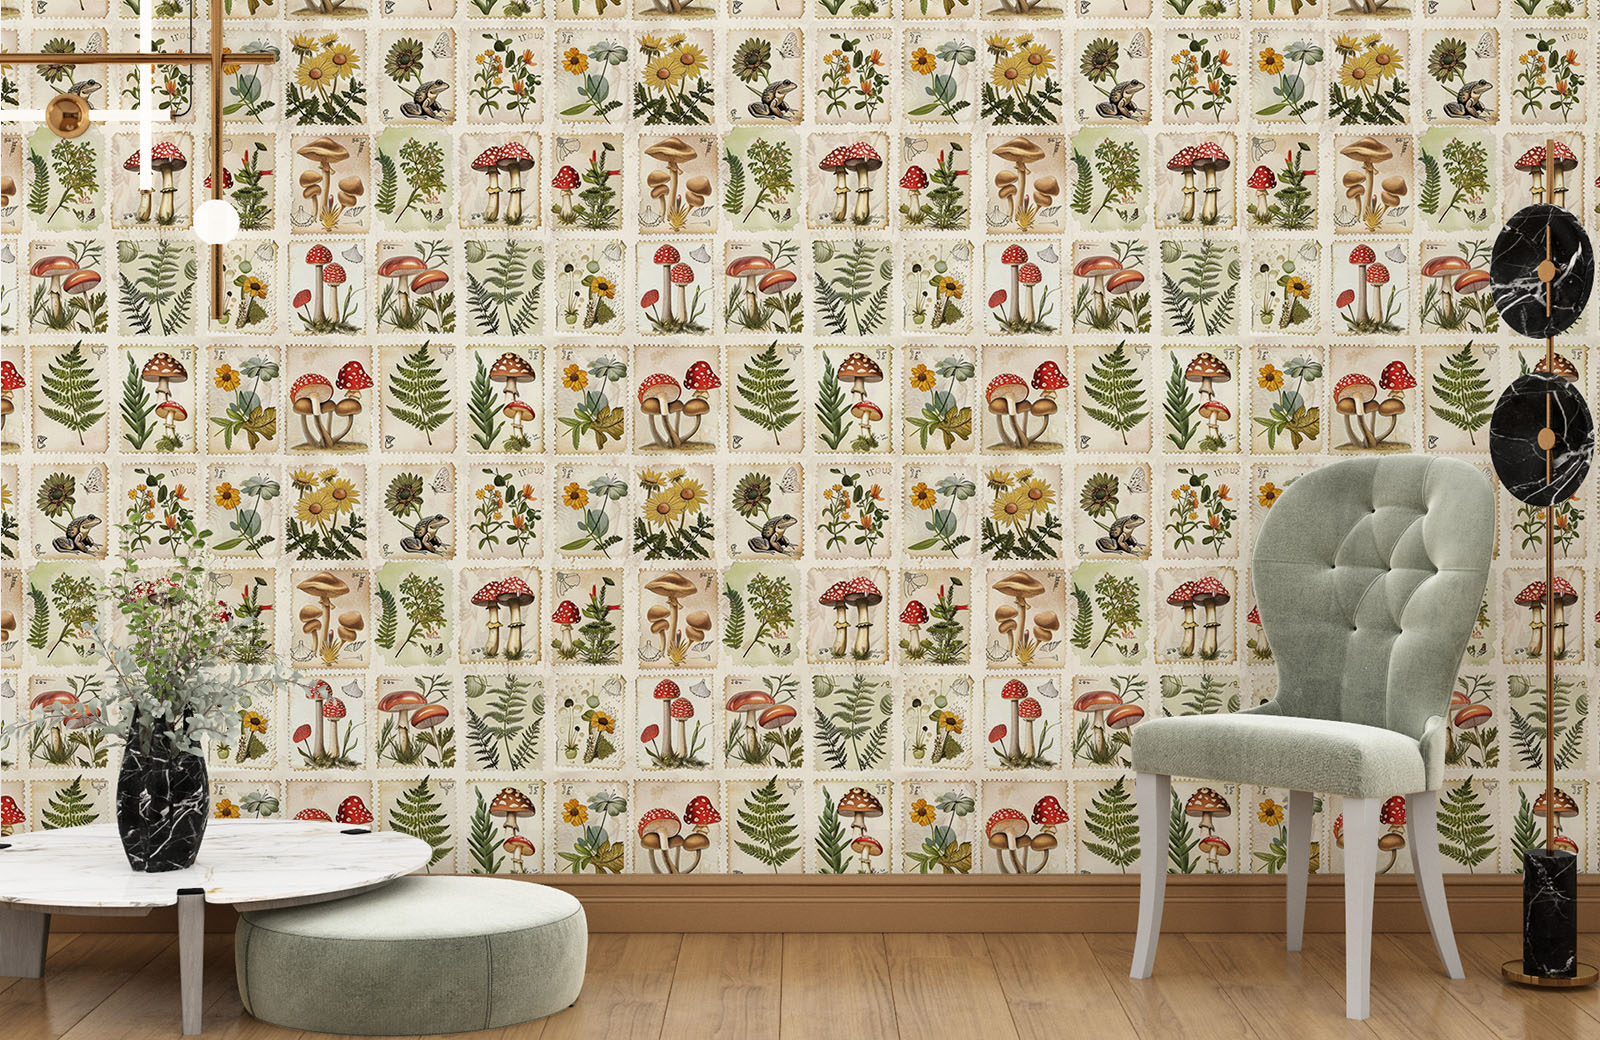 stamp-collage-of-botanical-design-wallpaper-with-chair